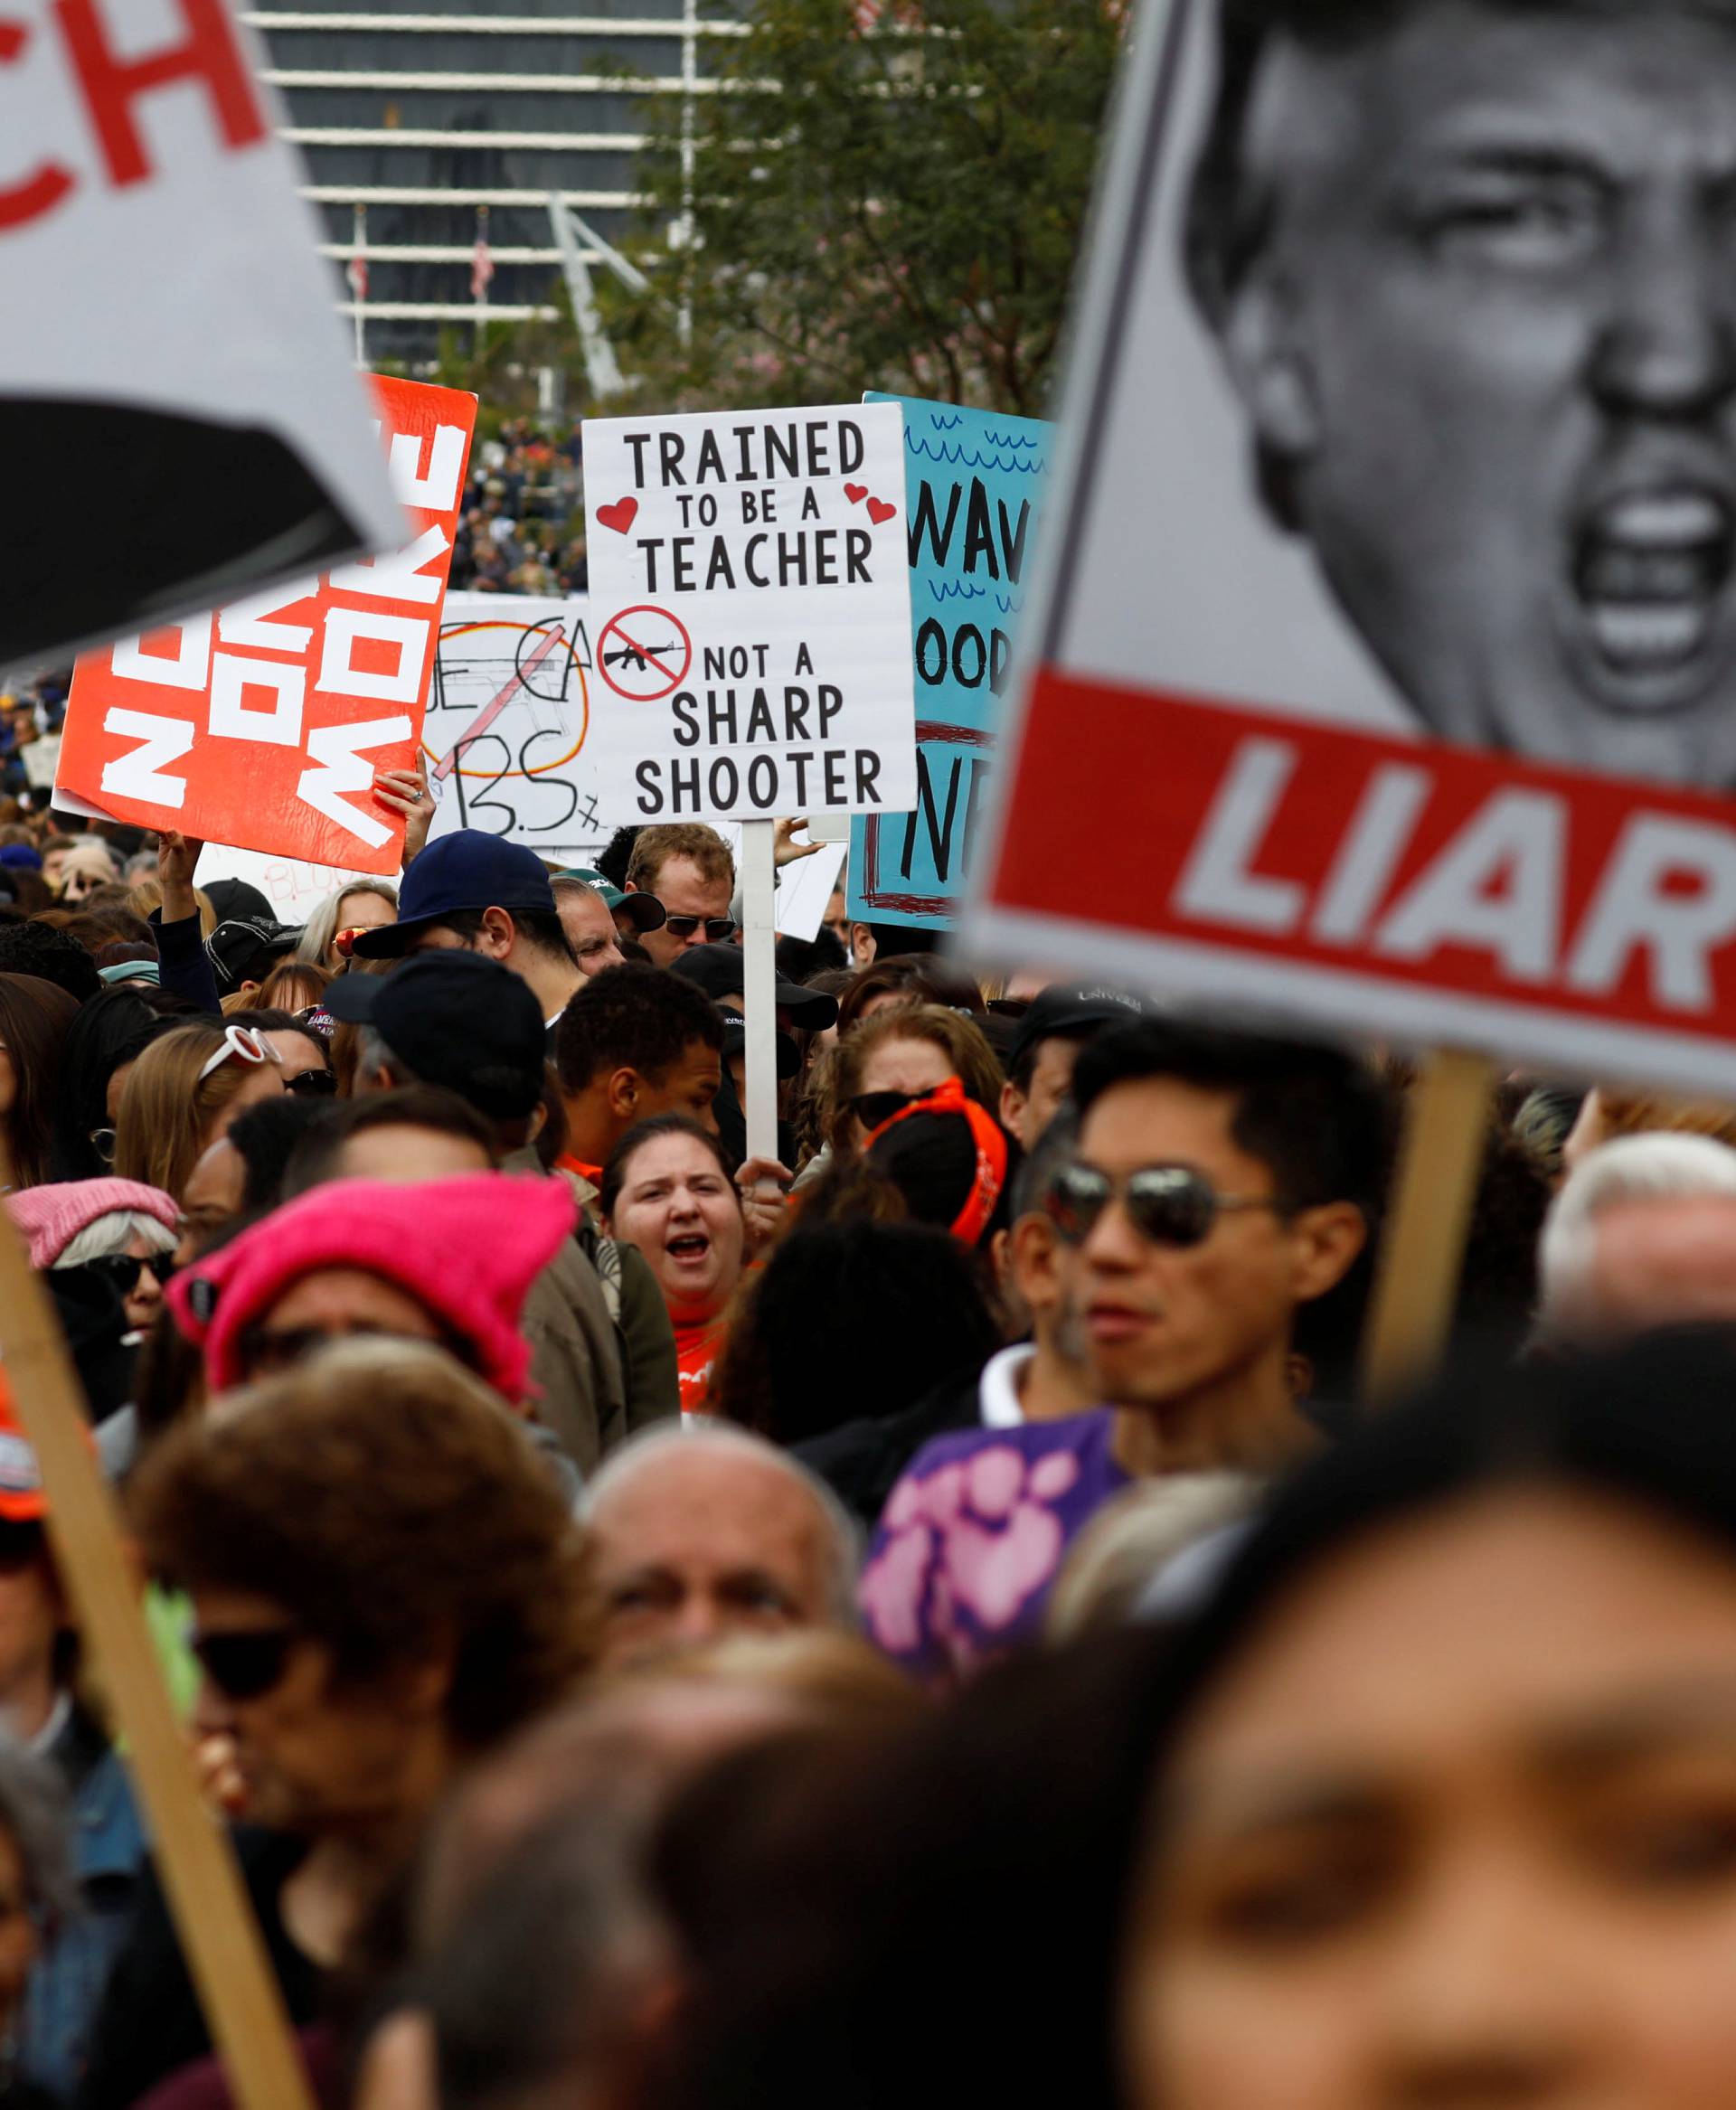 An attendee holds a sign in support of teachers during "March for Our Lives", an organized demonstration to end gun violence, in downtown Los Angeles